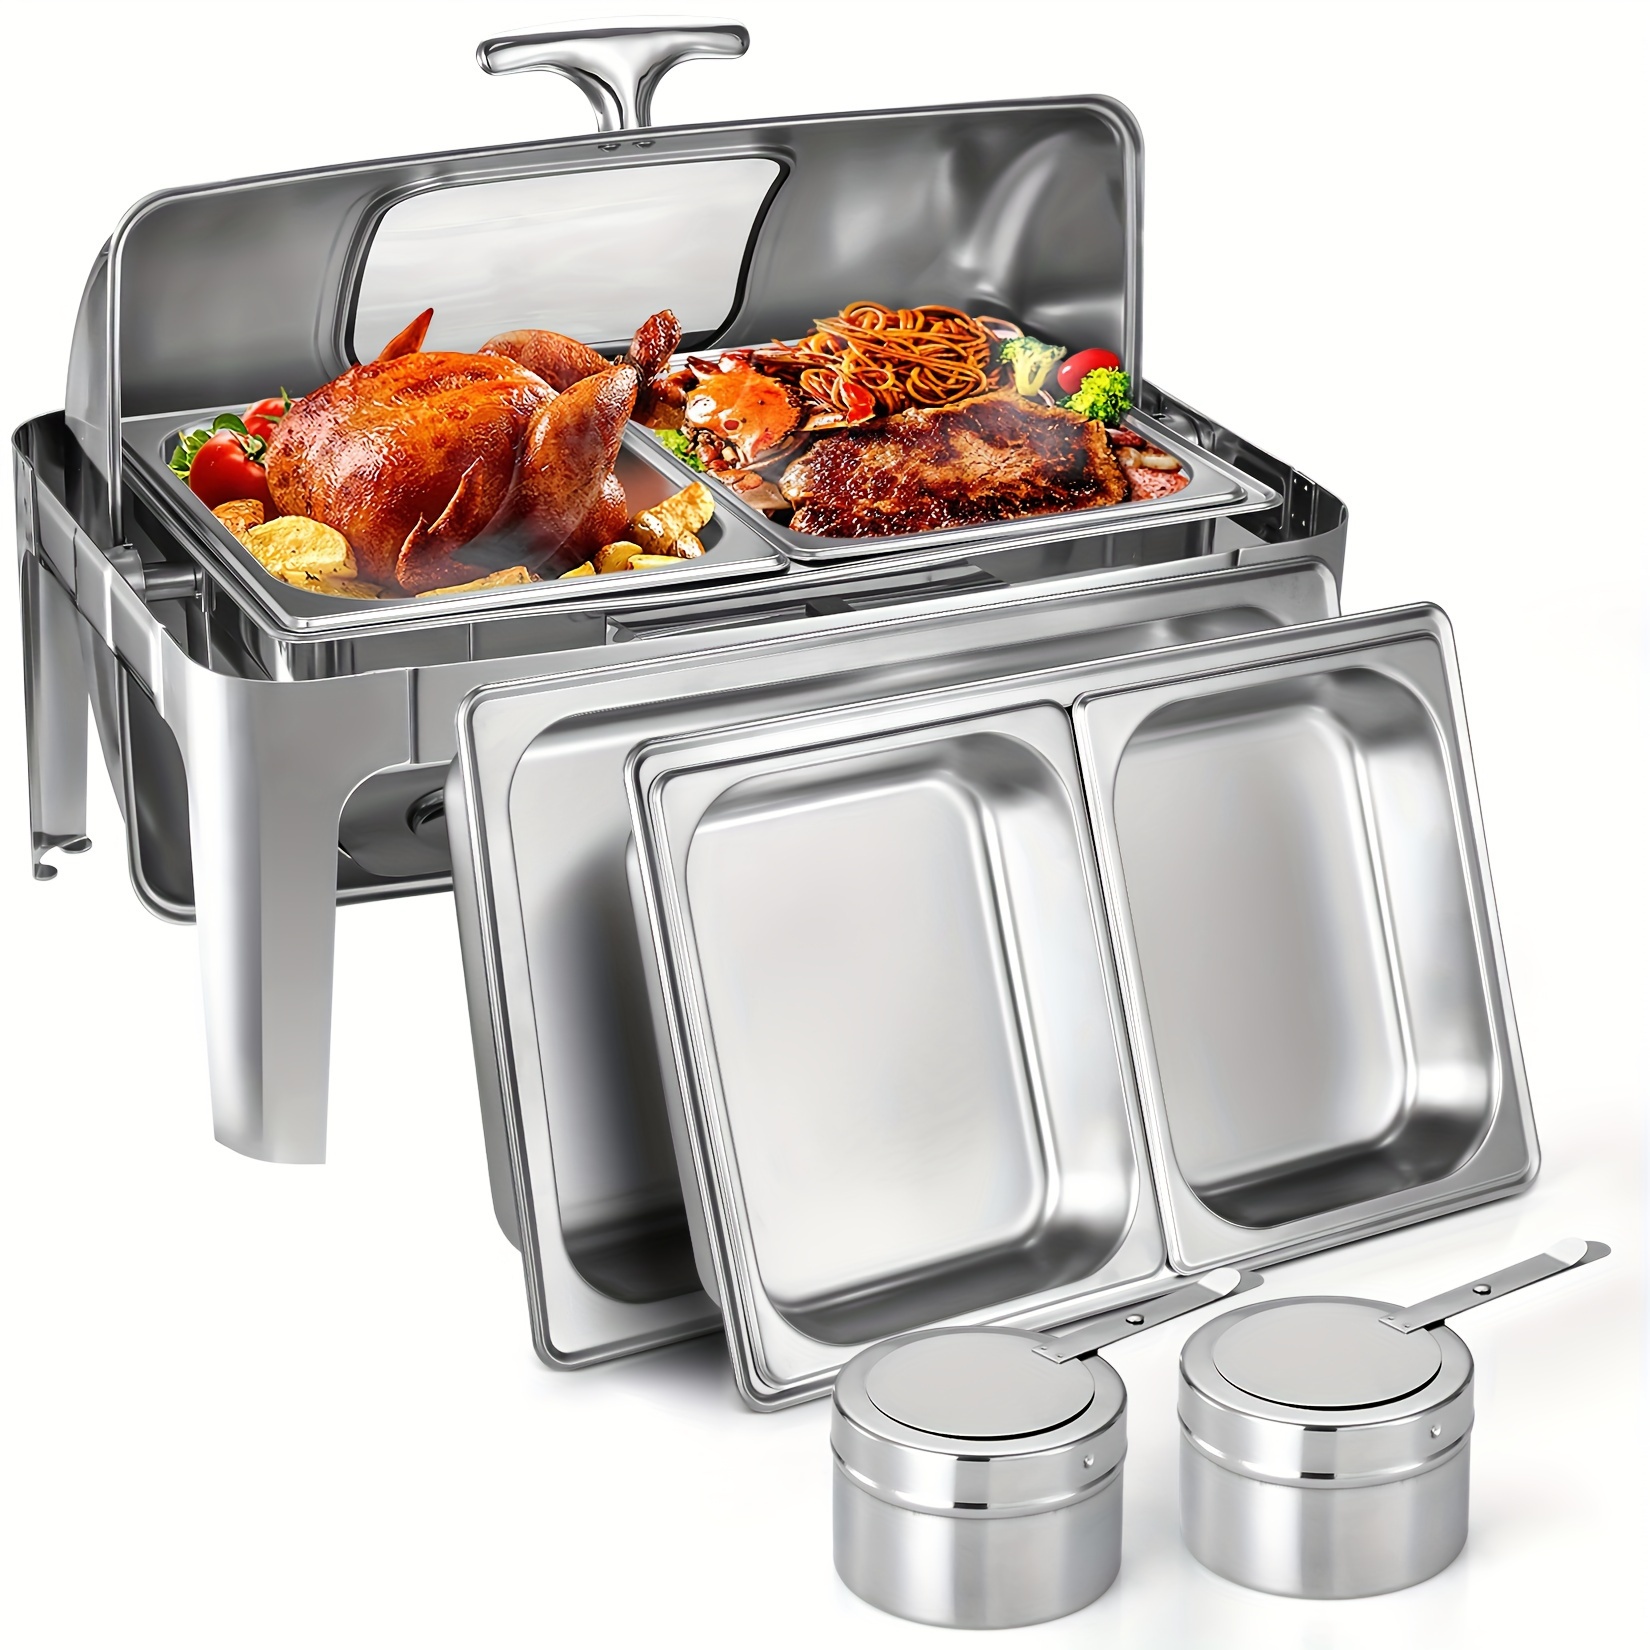 

9 Qt Chafing Dish Buffet Set, Rectangular Stainless Steel Food Warmer With Visible Lid For Parties, Dinners And Catering